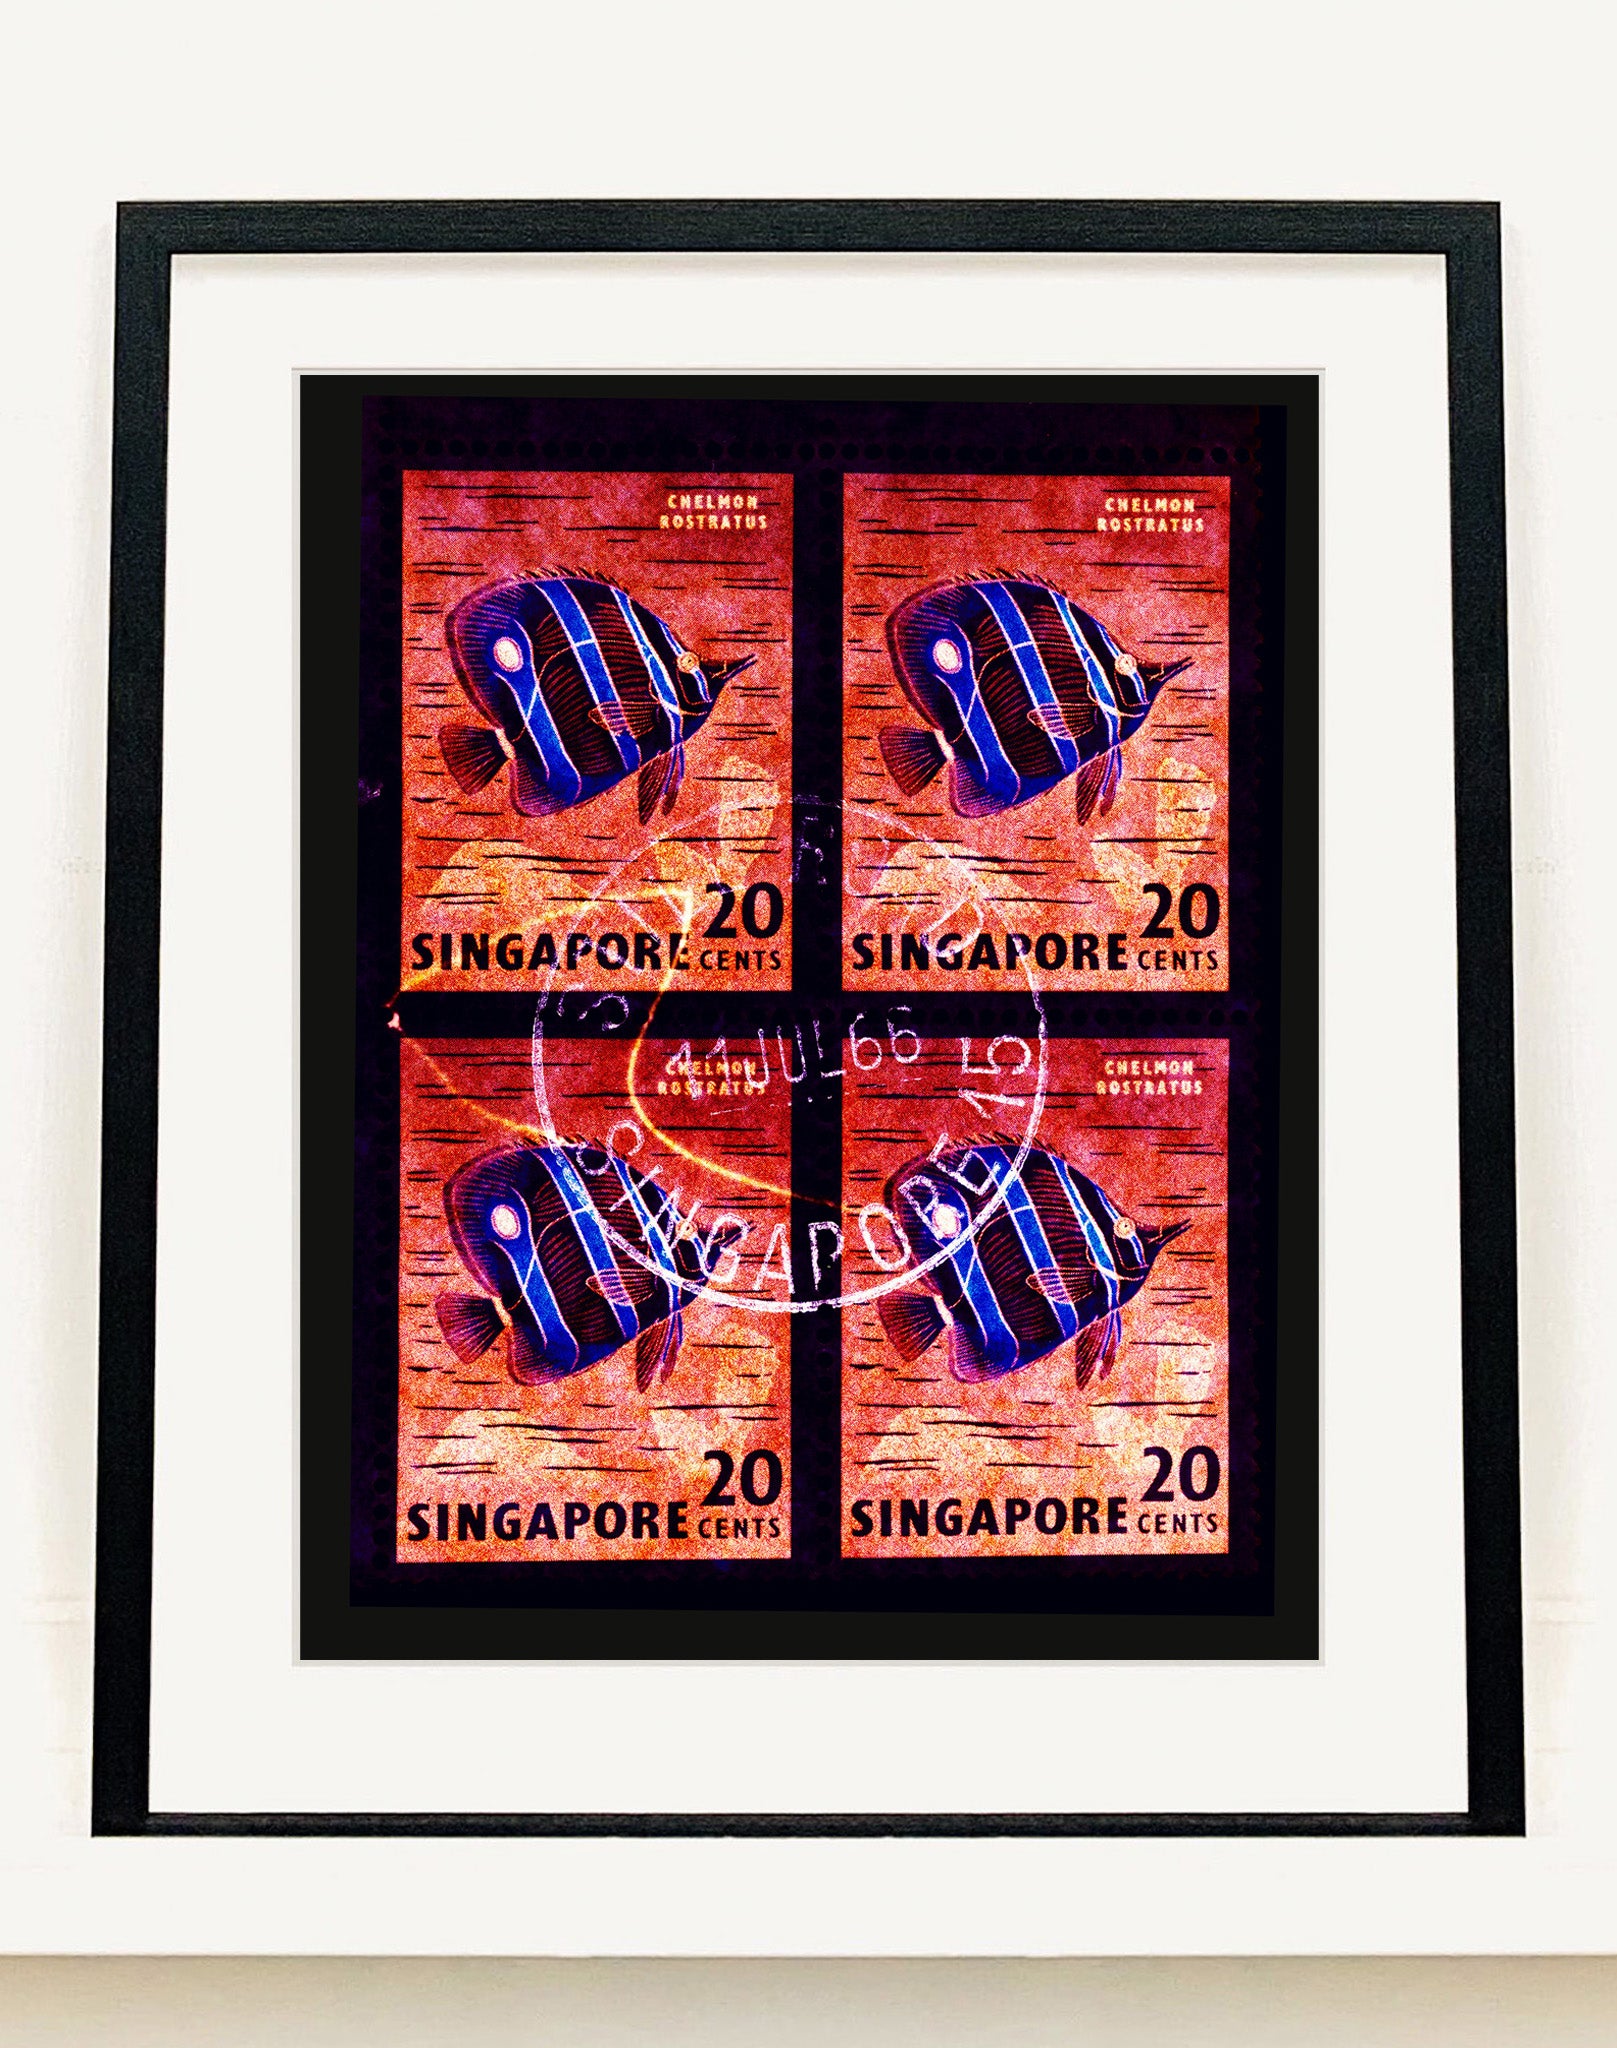 20 Cents Singapore Butterfly Fish from Heidler & Heeps Stamp Collection, Singapore Series "Postcards from Afar". The fine detailed tapestry of the original small postage stamp has been brought to life, made unique by the franking stamp and Heidler & Heeps specialist darkroom process. 